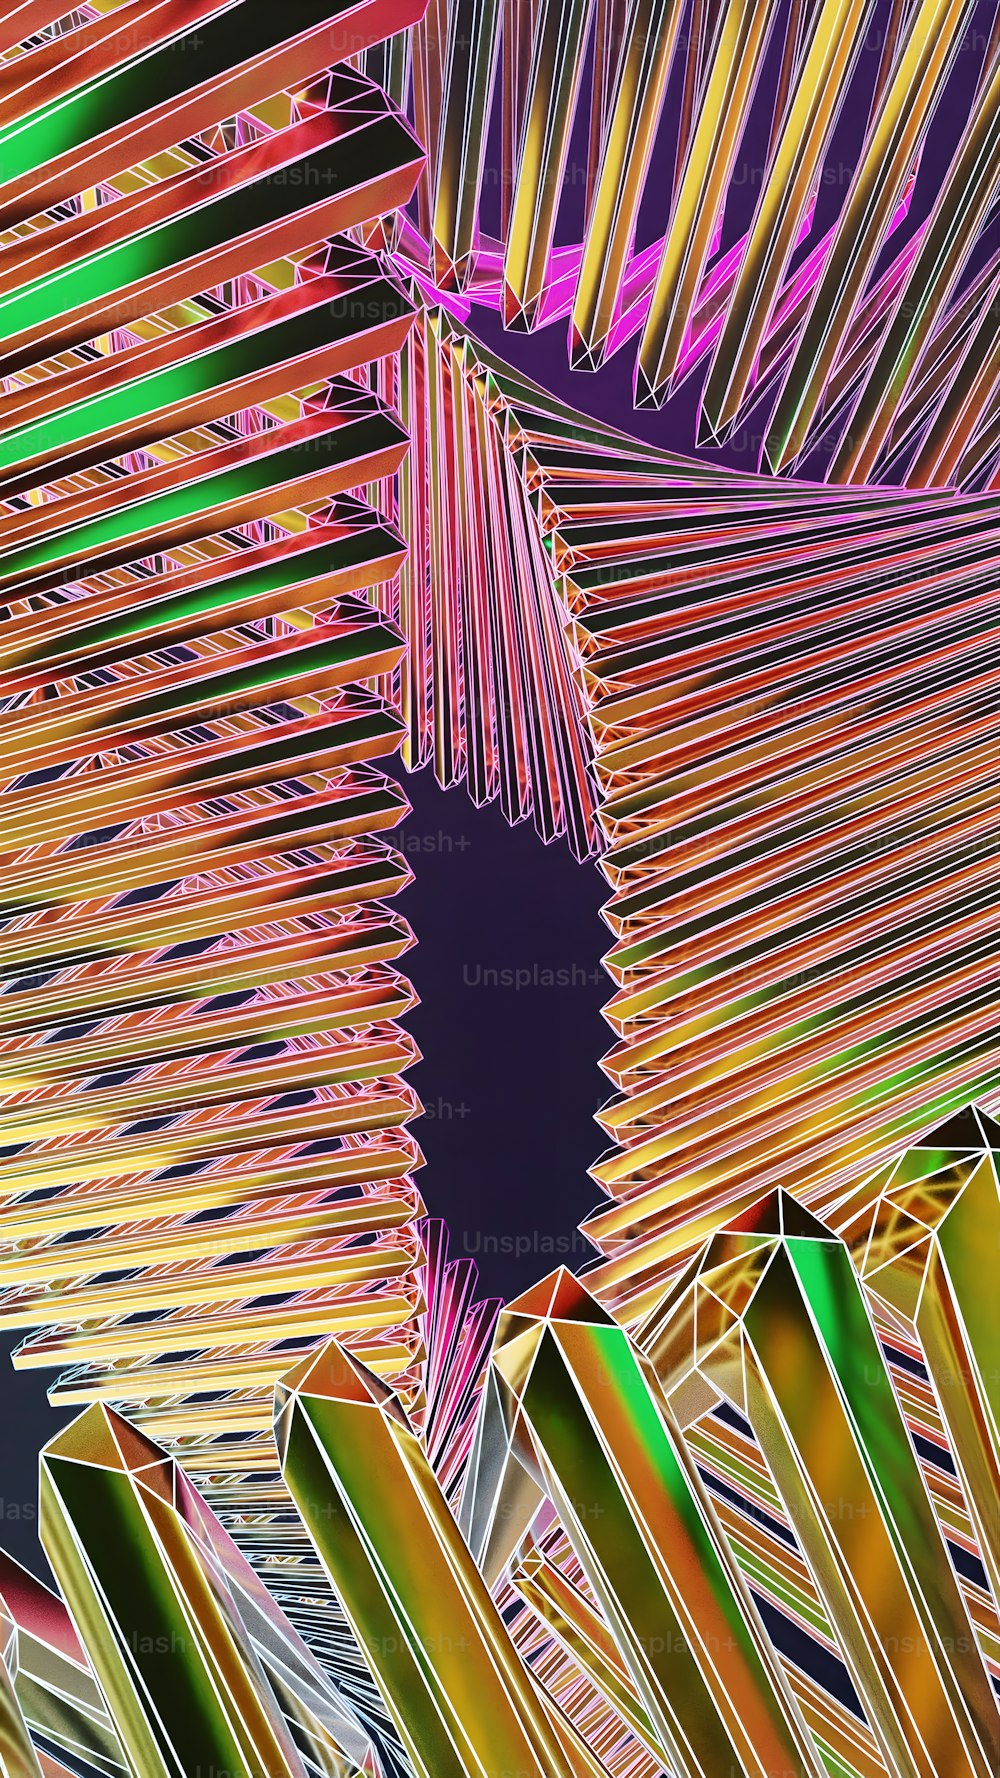 an abstract image of colorful lines and shapes